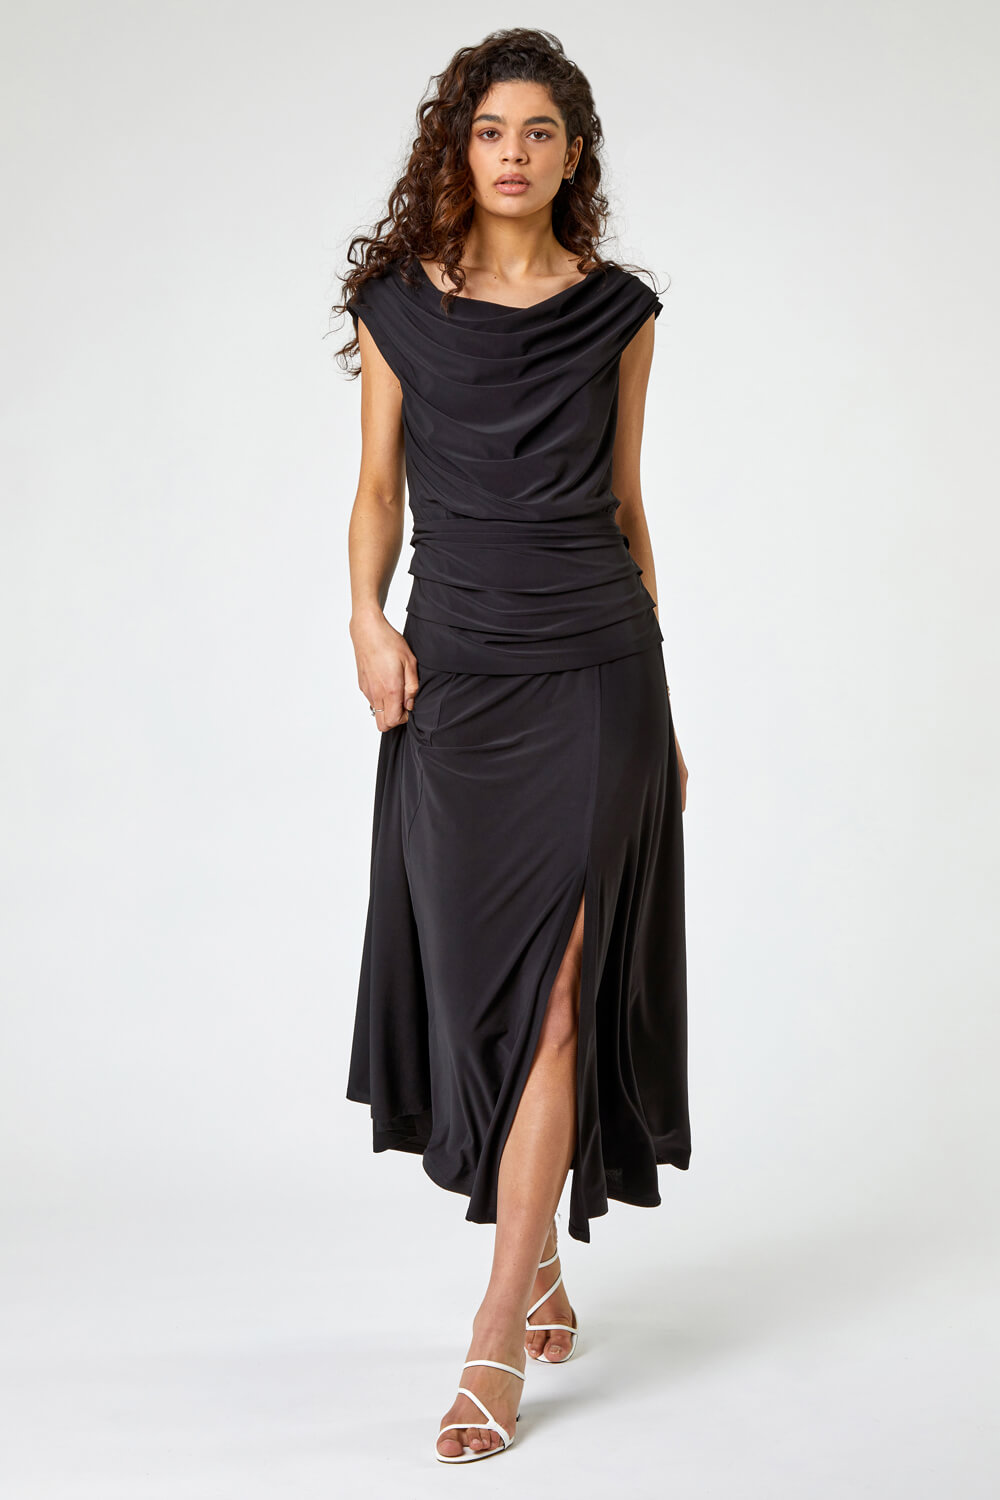 Black Cowl Neck Ruched Maxi Dress, Image 3 of 4